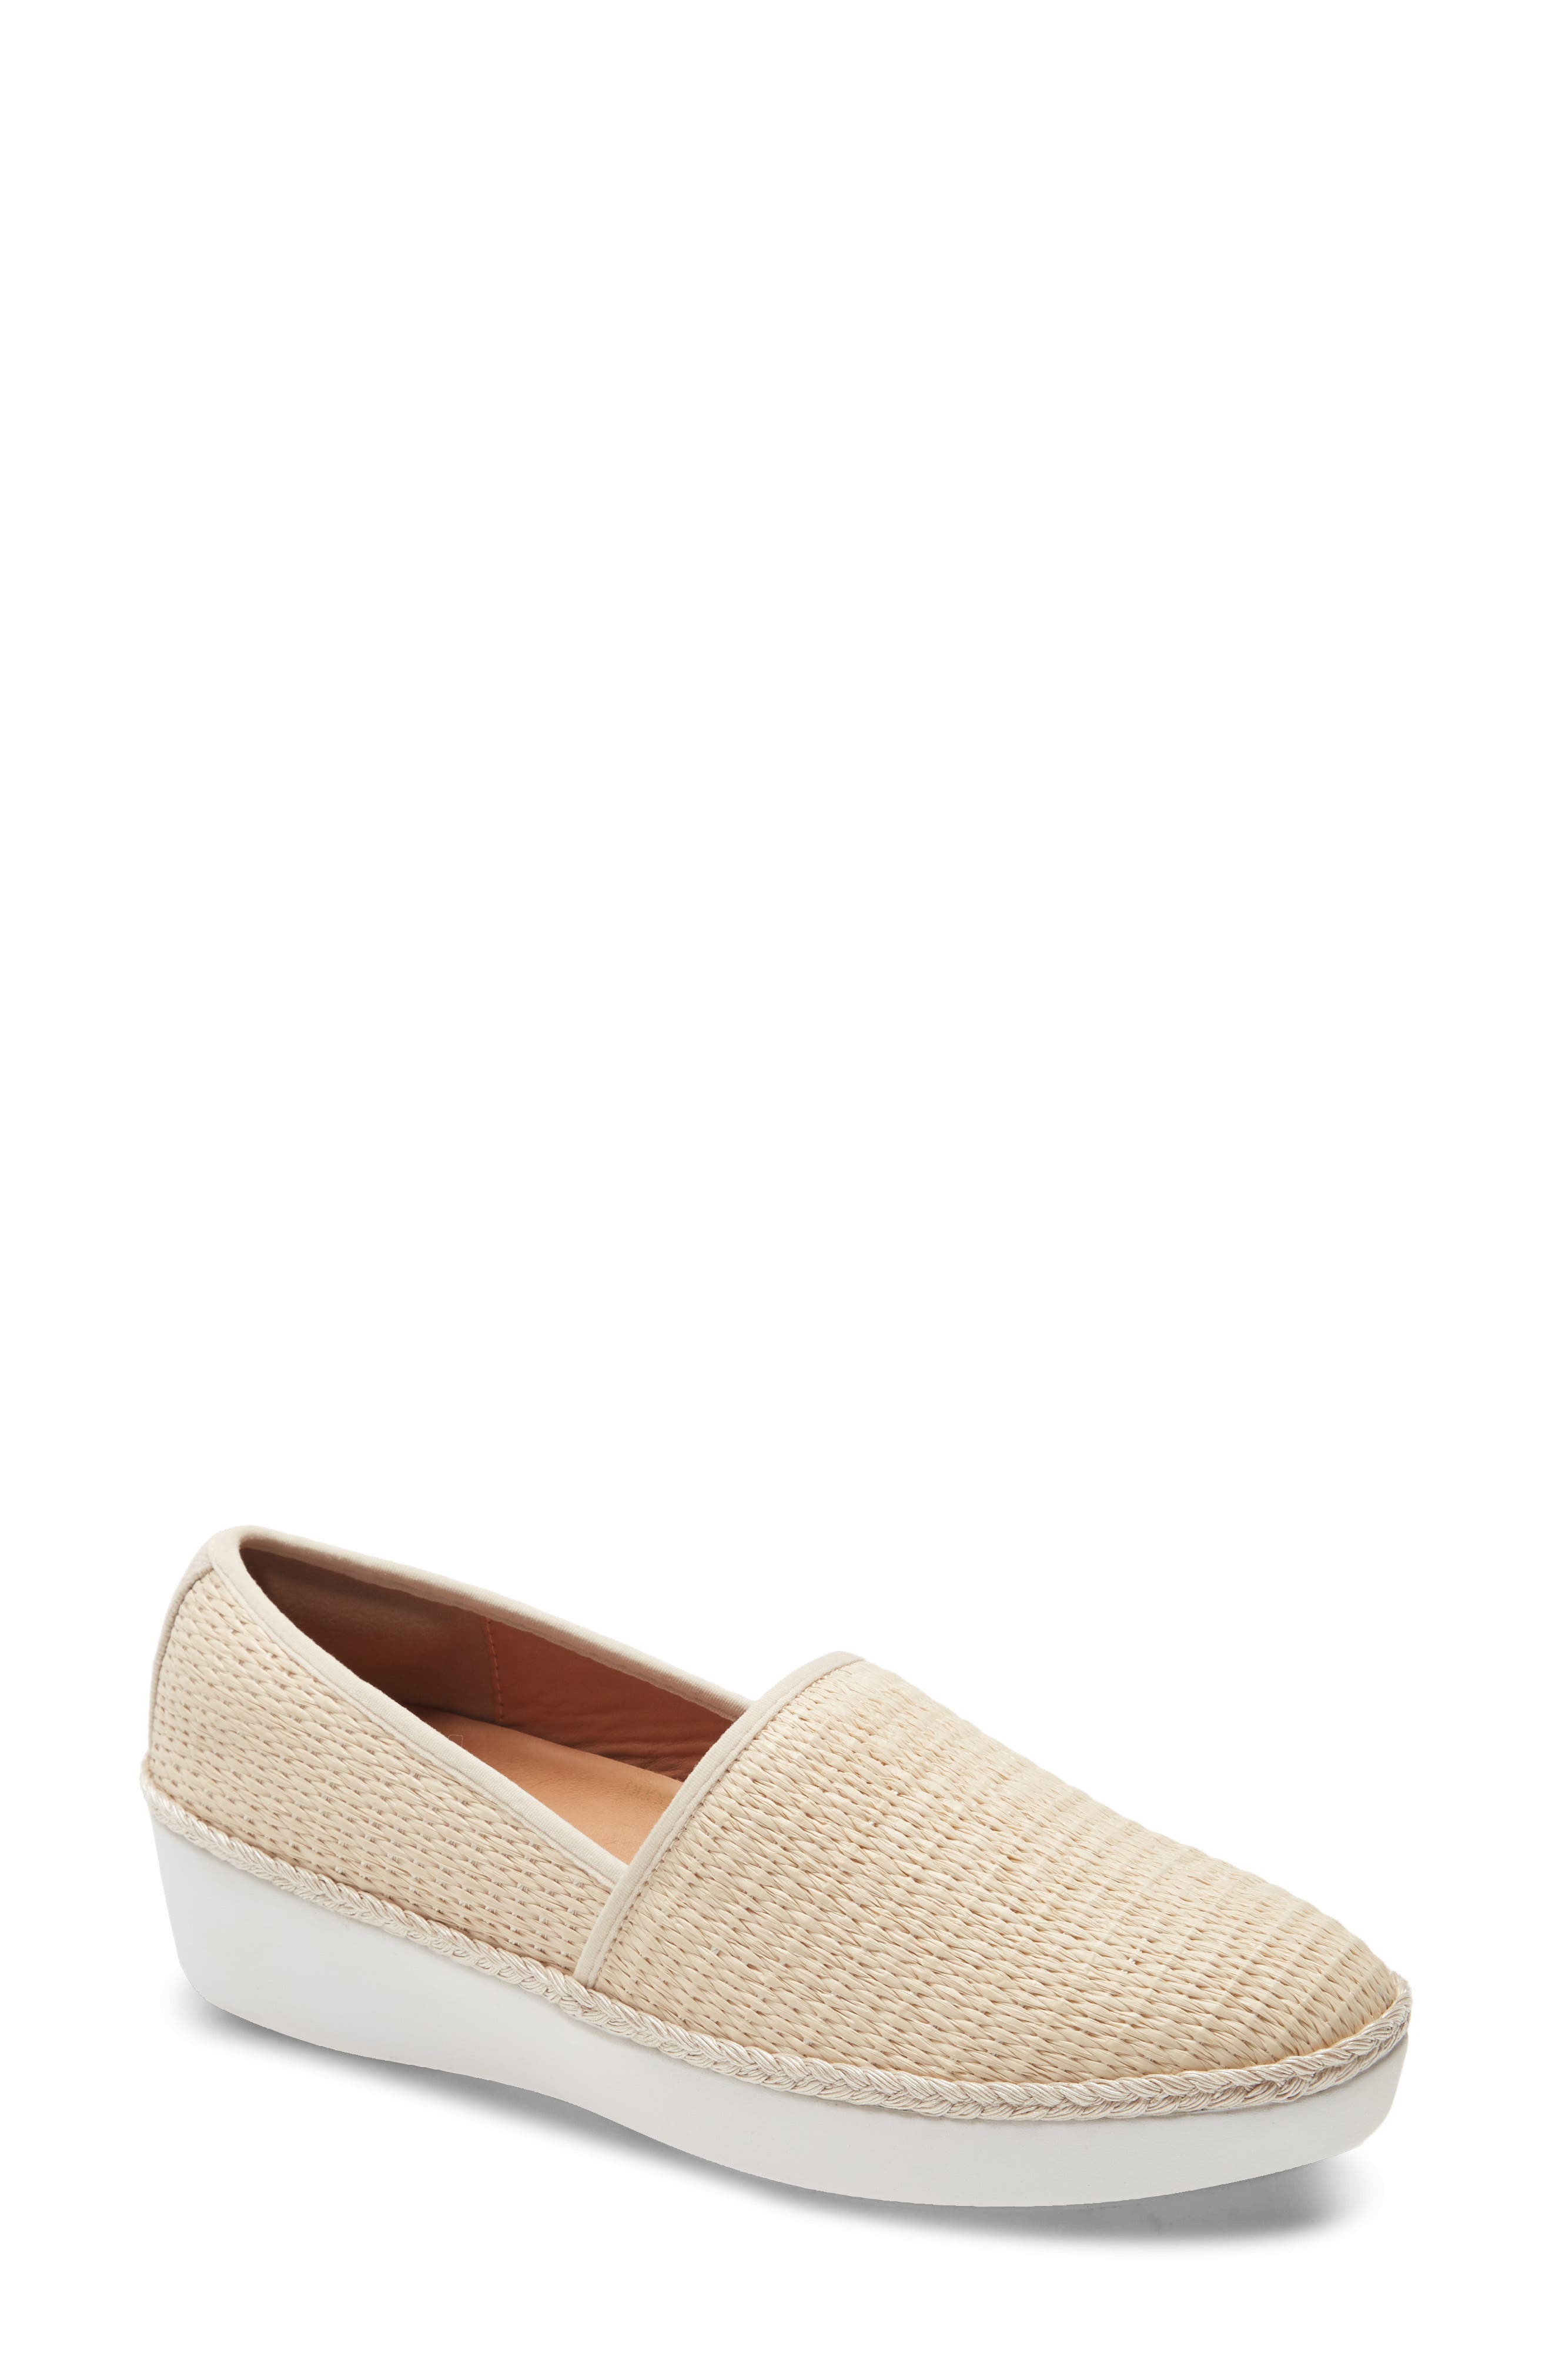 nordstrom fitflop sneakers